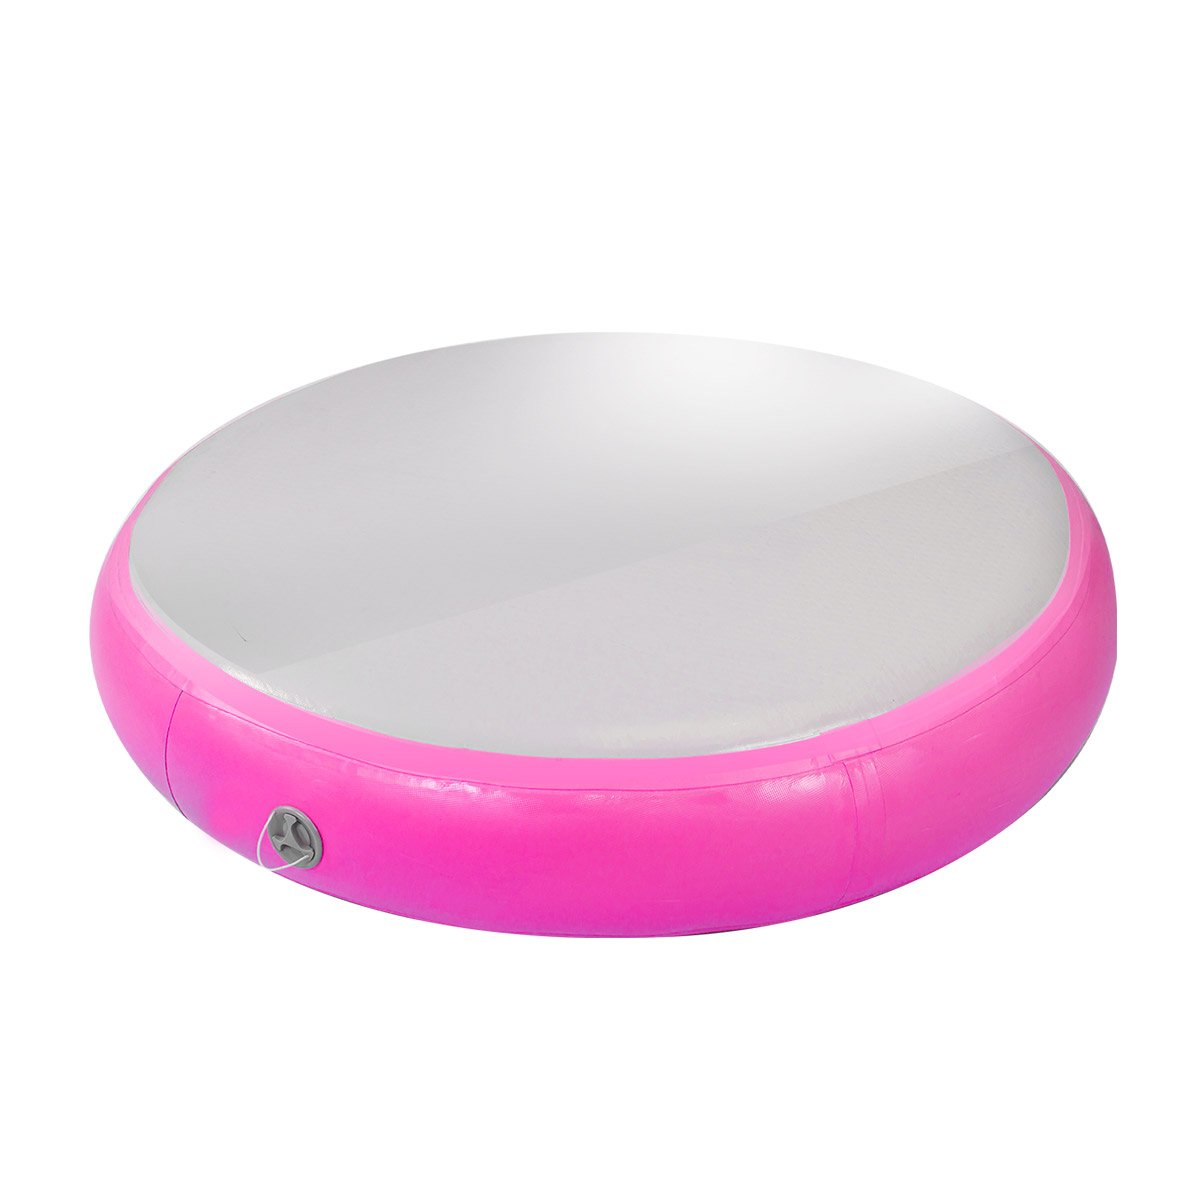 1m Air Spot Round Inflatable Gymnastics Tumbling Mat with Pump - Pink 2